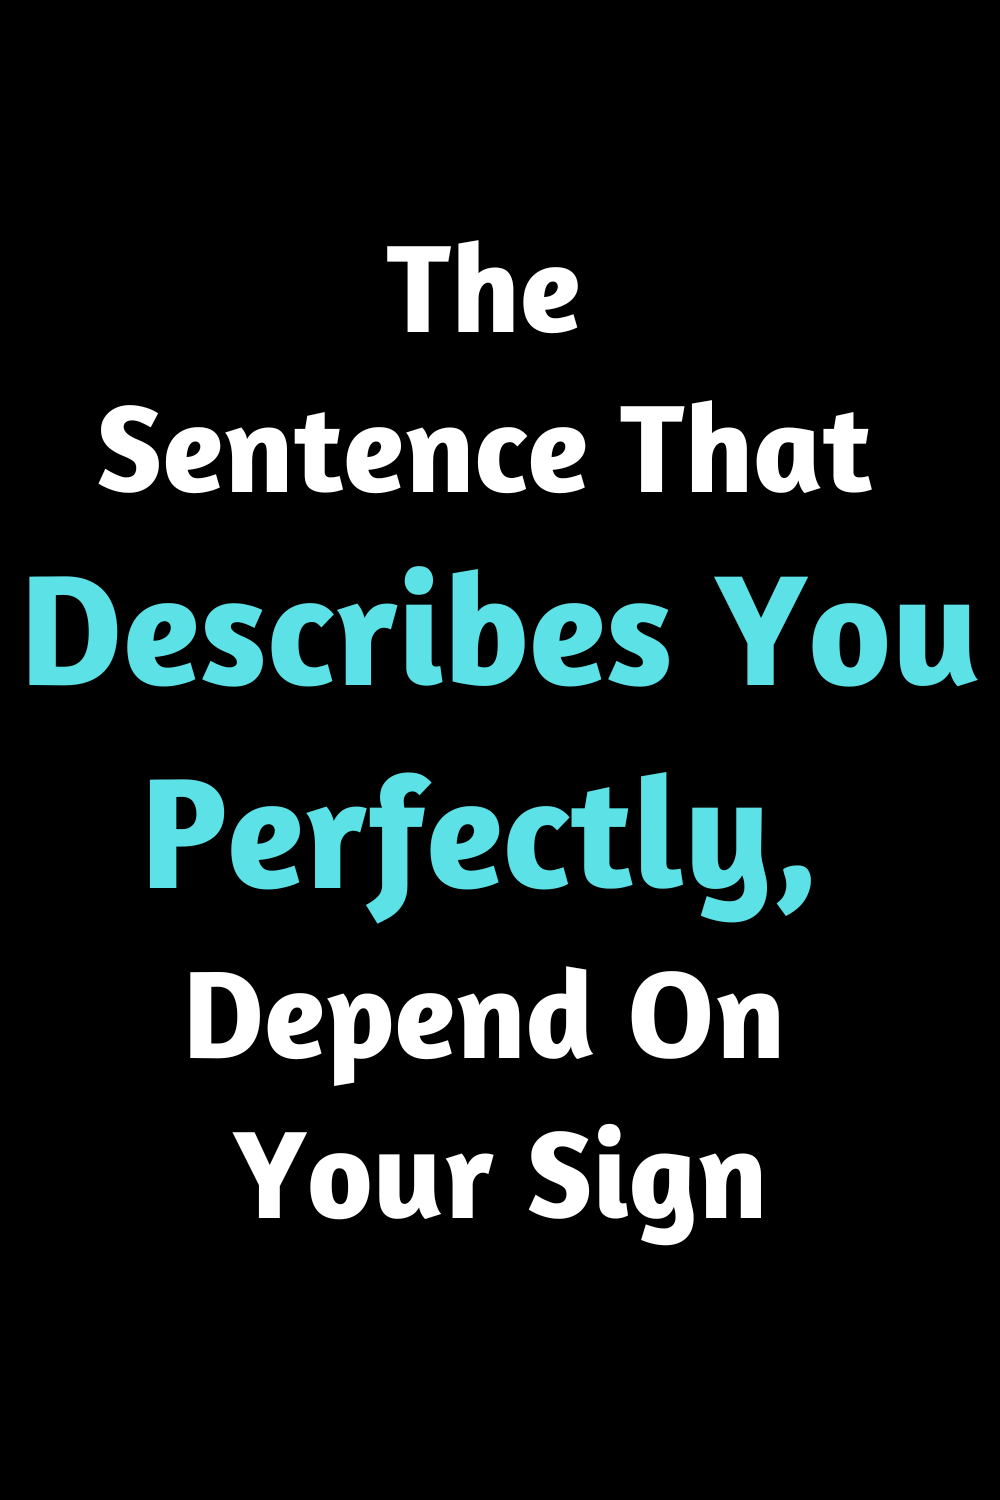 The Sentence That Describes You Perfectly, Depend On Your Sign